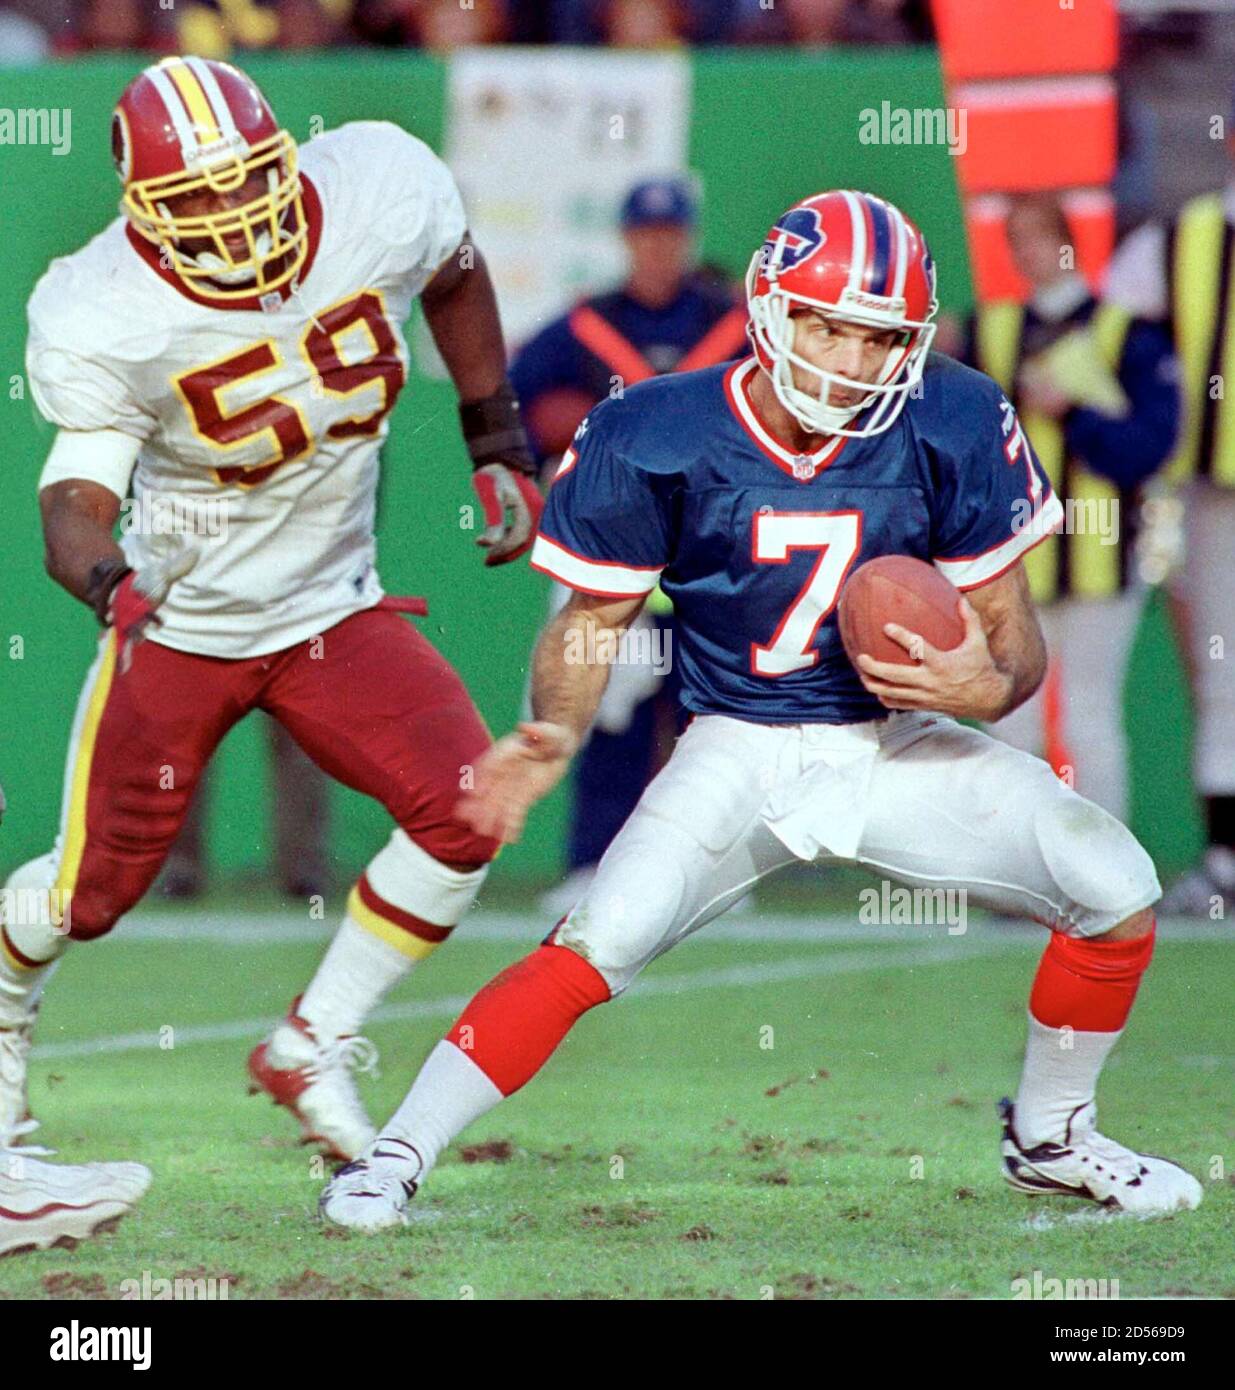 Buffalo Bills quarterback Doug (7) spins from rush from Washington Redskins' Shawn Barber (59) during the third quarter at Redskins Stadium November 7. Buffalo went on to win the